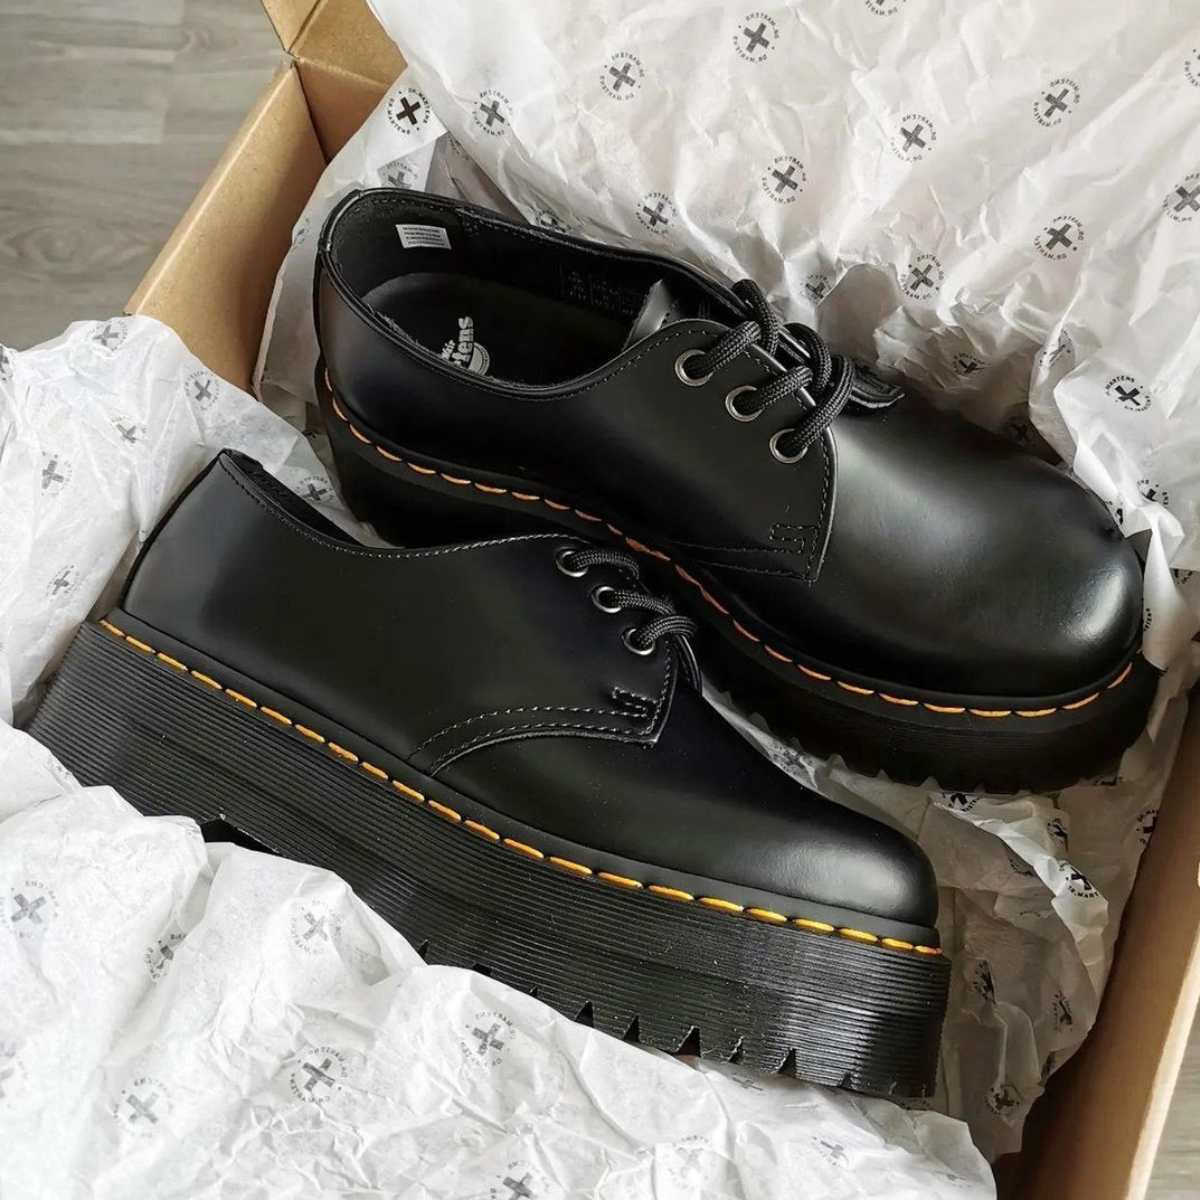 Dr Martens Buyer's Guide